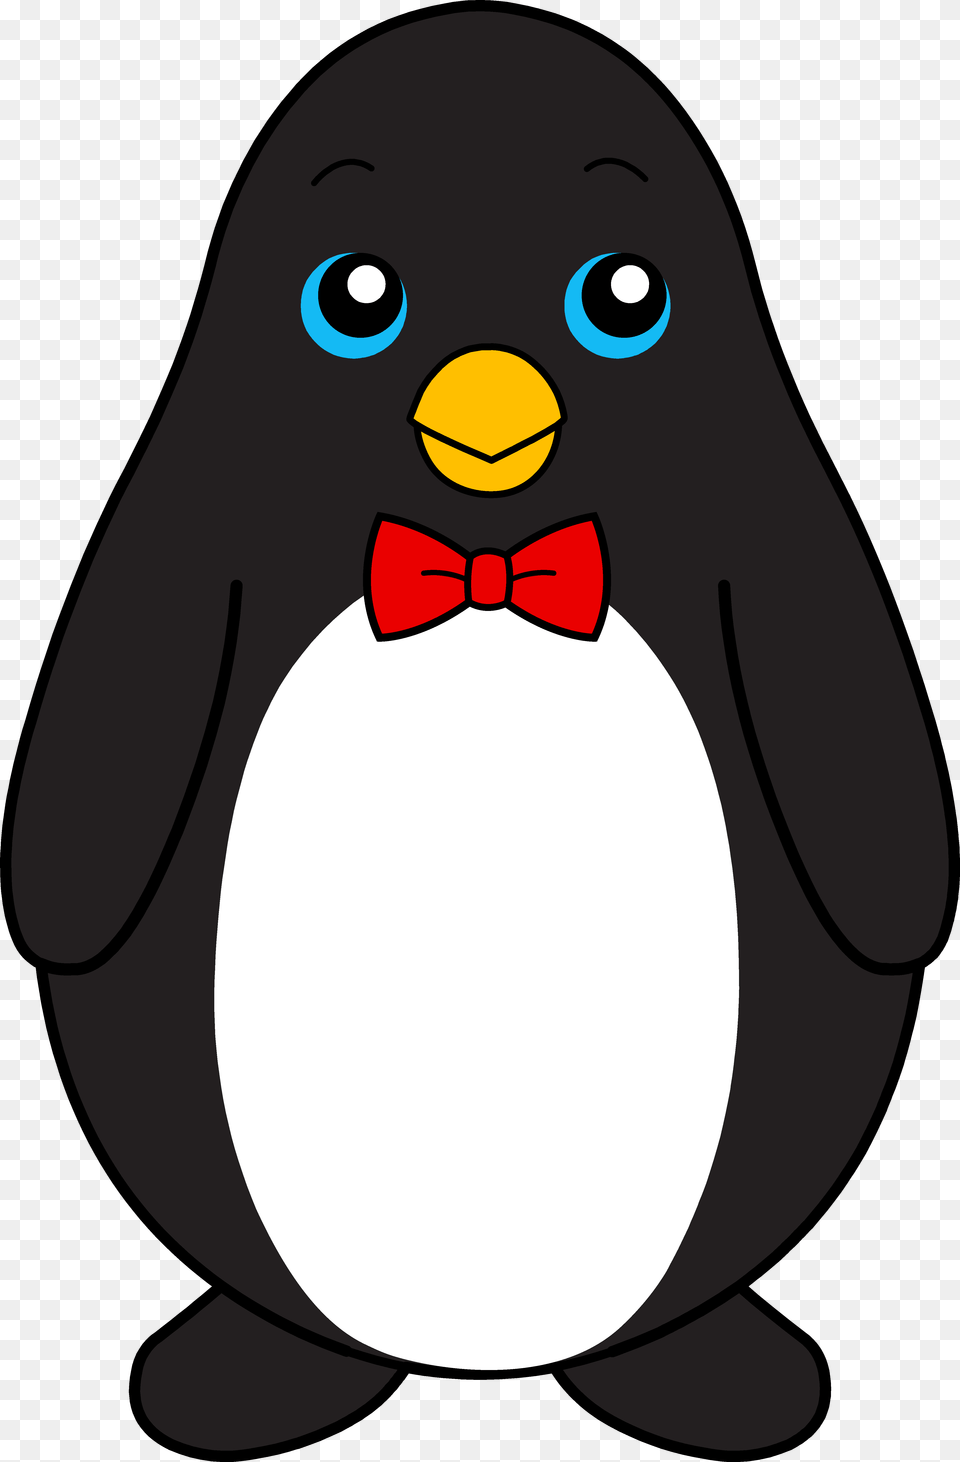 Holiday Holidays Clipart Tie For And Use In Presentations Penguin With A Tie, Animal, Bird, Accessories, Formal Wear Png Image